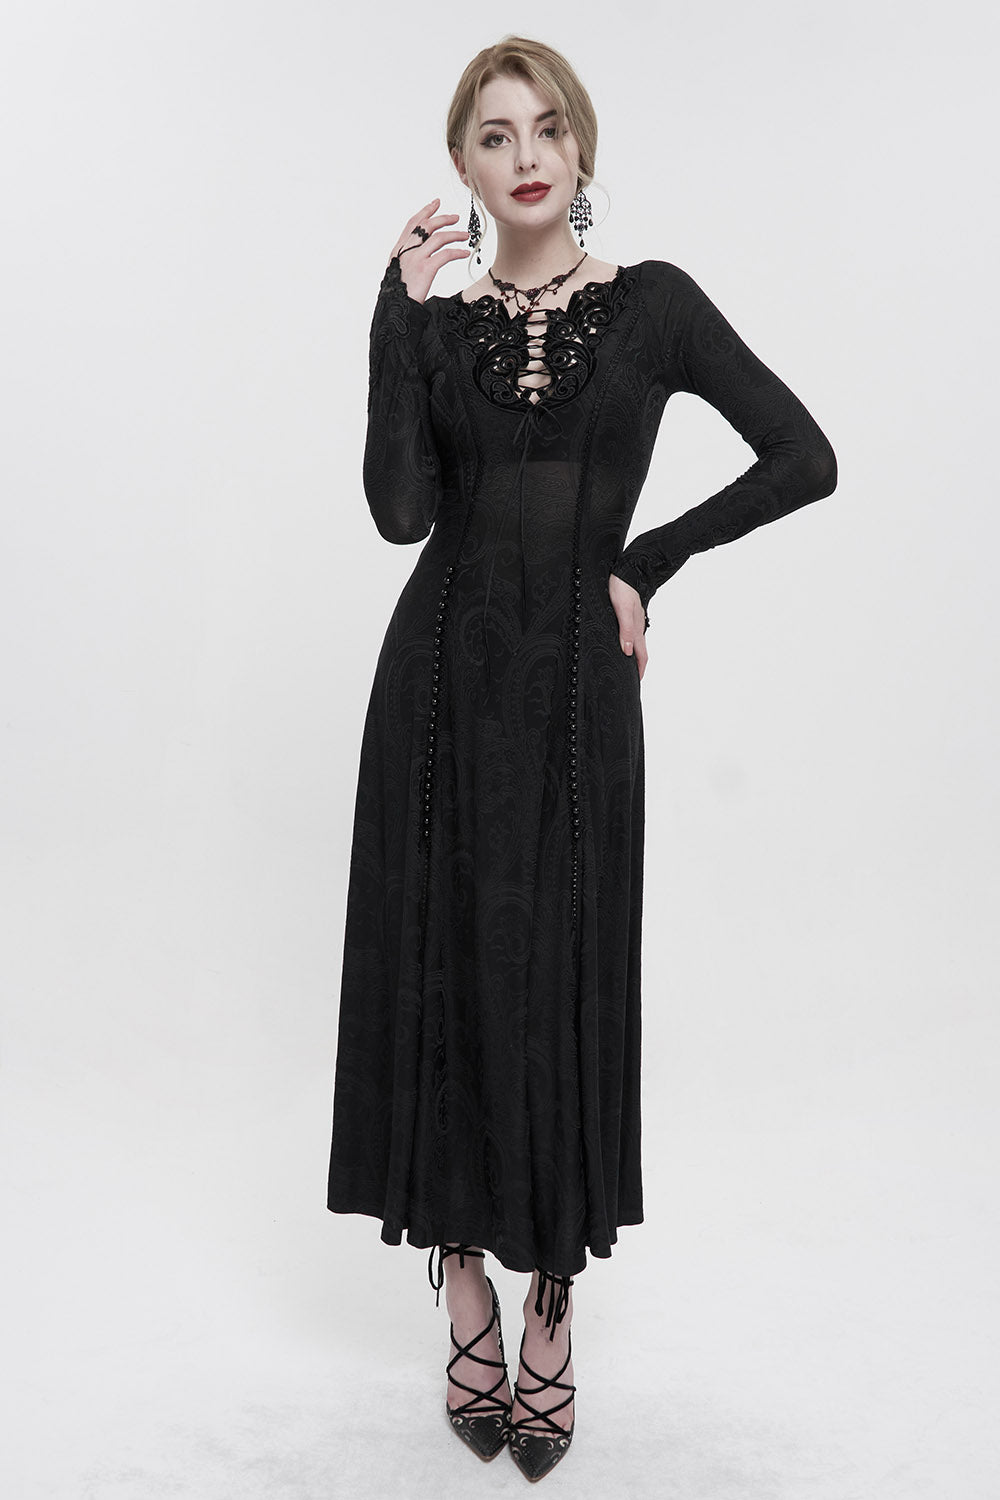 vintage inspired gothic gown